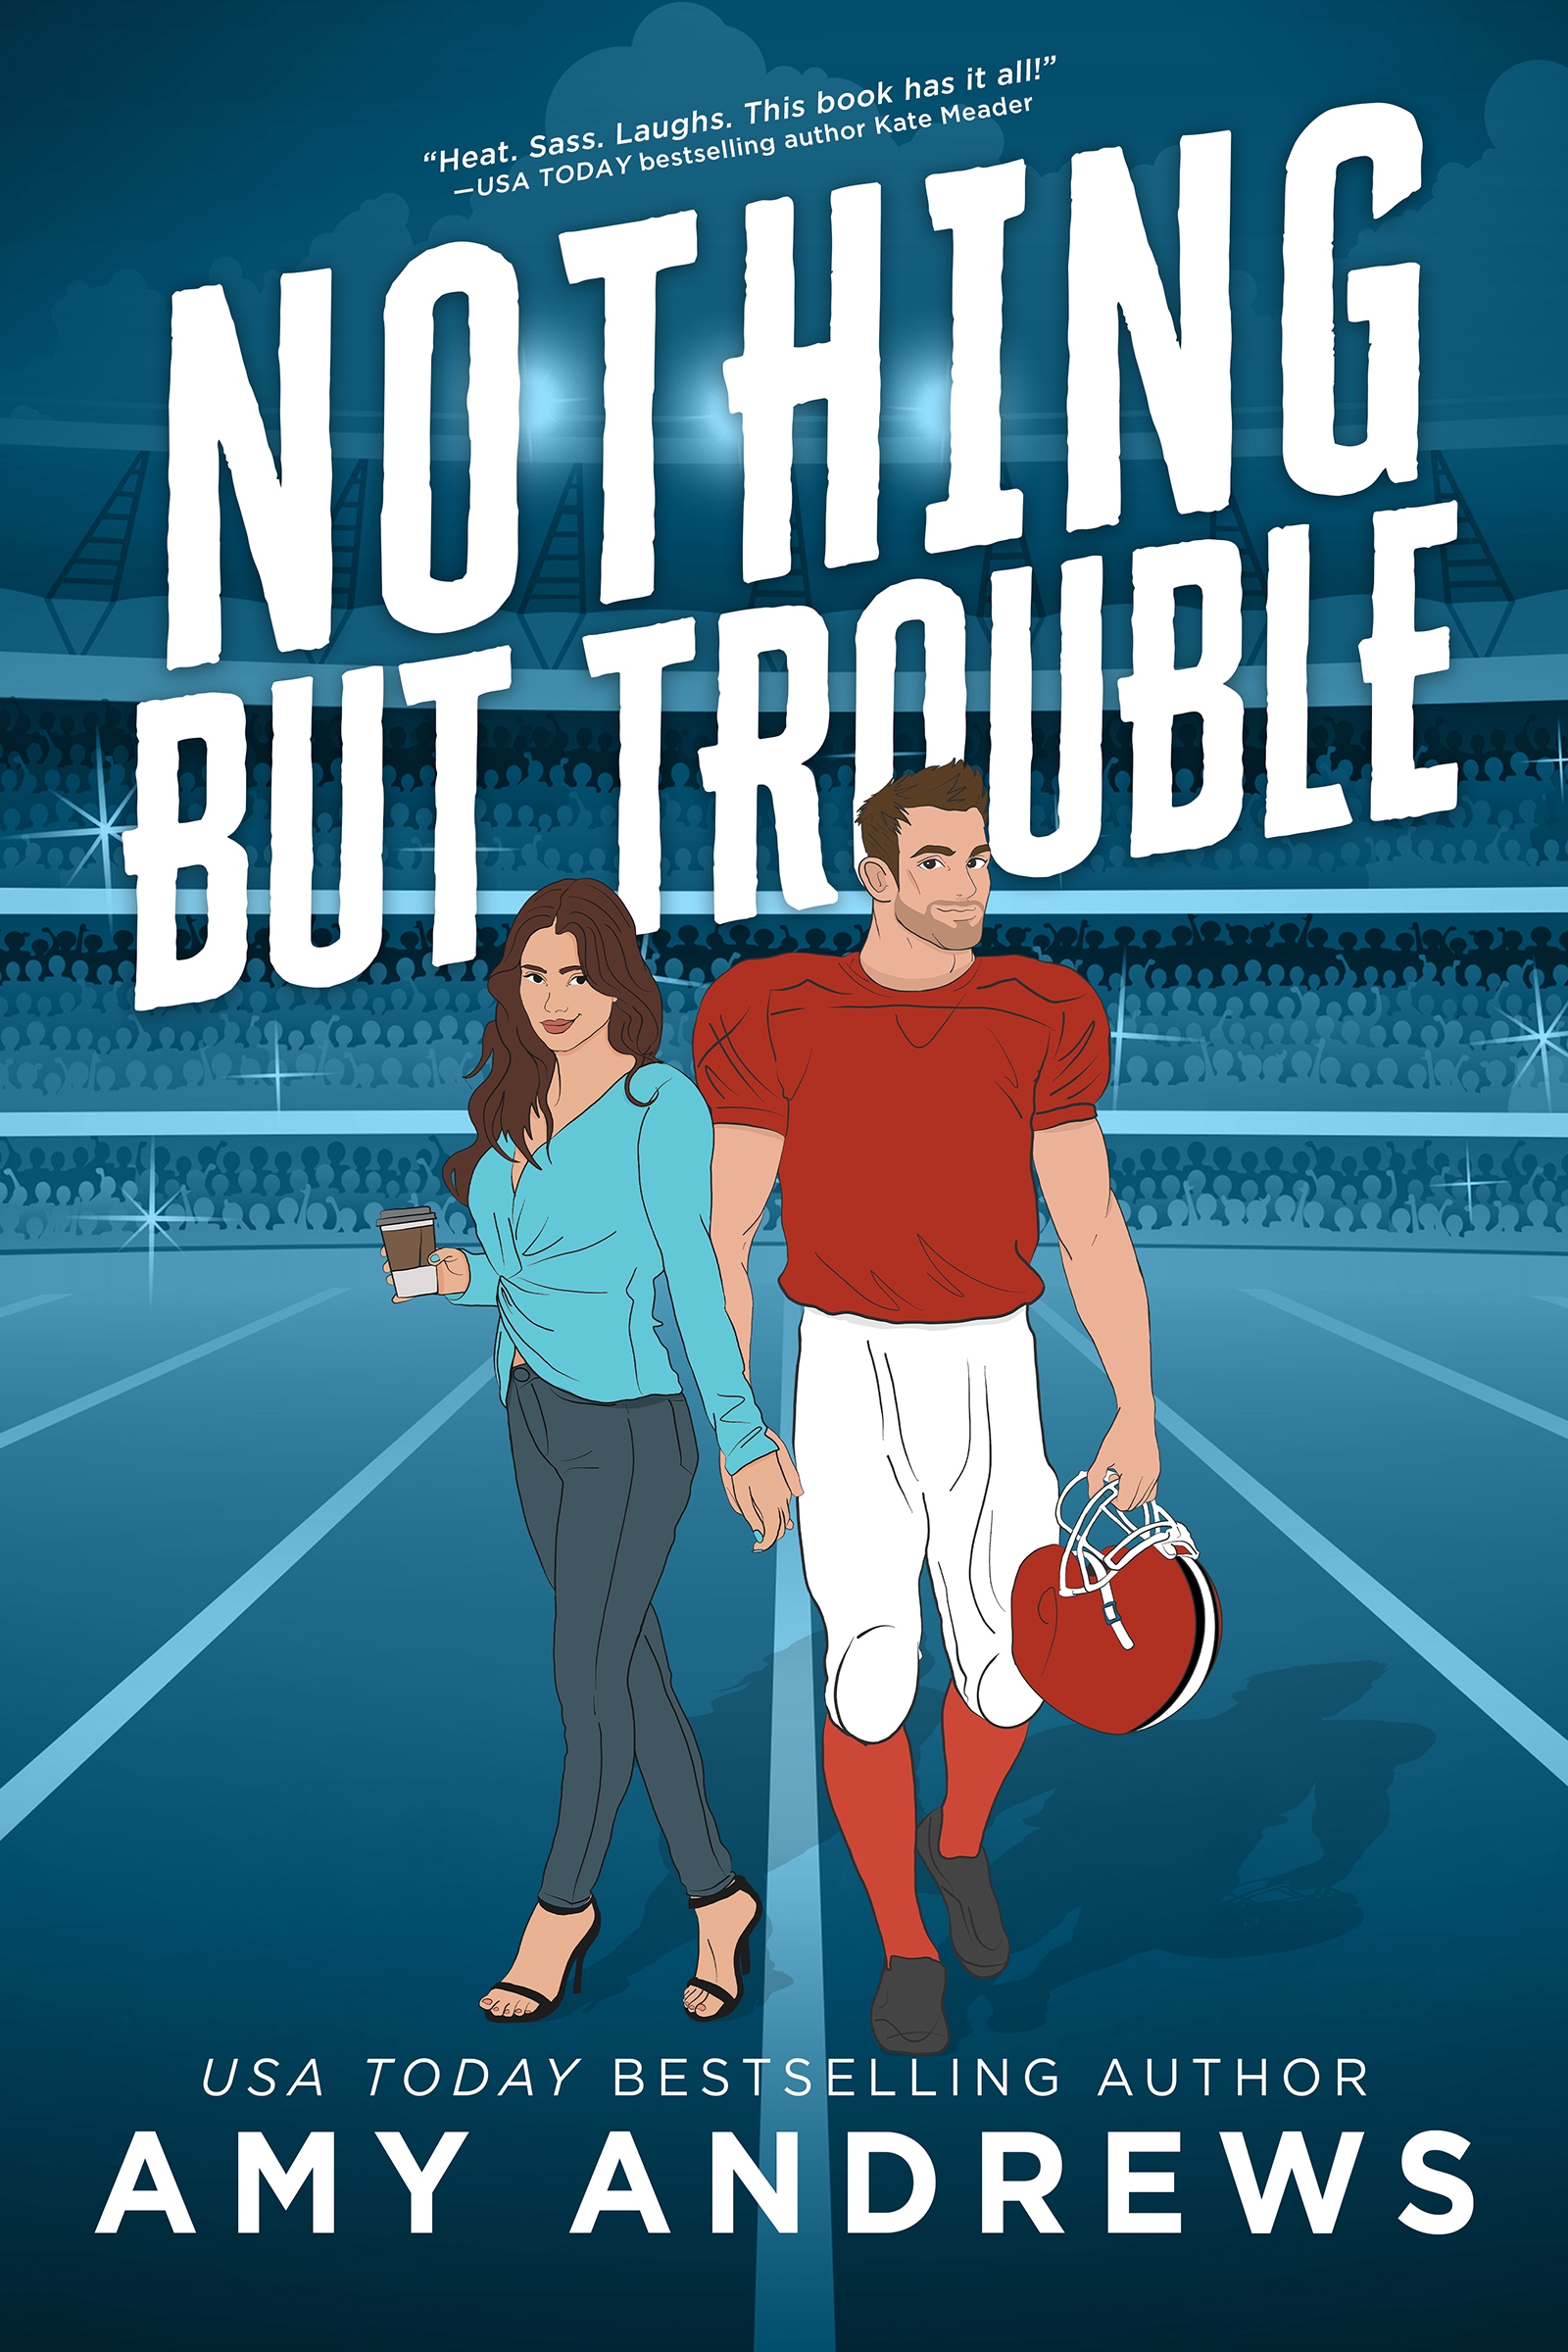 Nothing But Trouble cover image